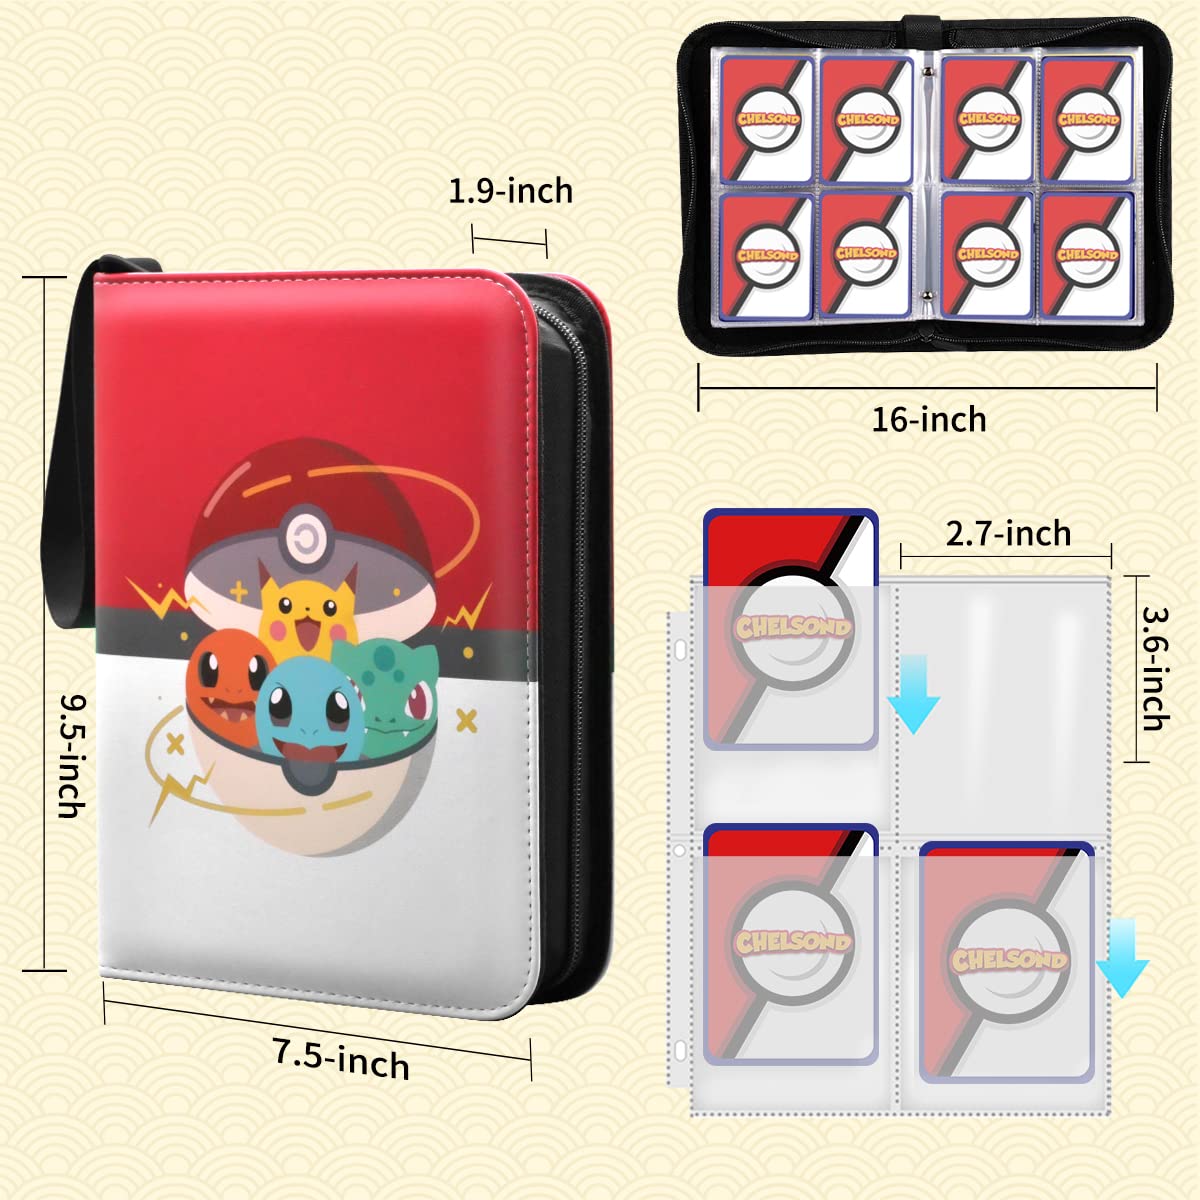 LIMSTDIC Card Binder for Pokemon Cards, 4 Pockets Up to 400 Cards Binder  Compatible with Pokemon Trading Cards, MTG Cards, Portable Waterproof Card